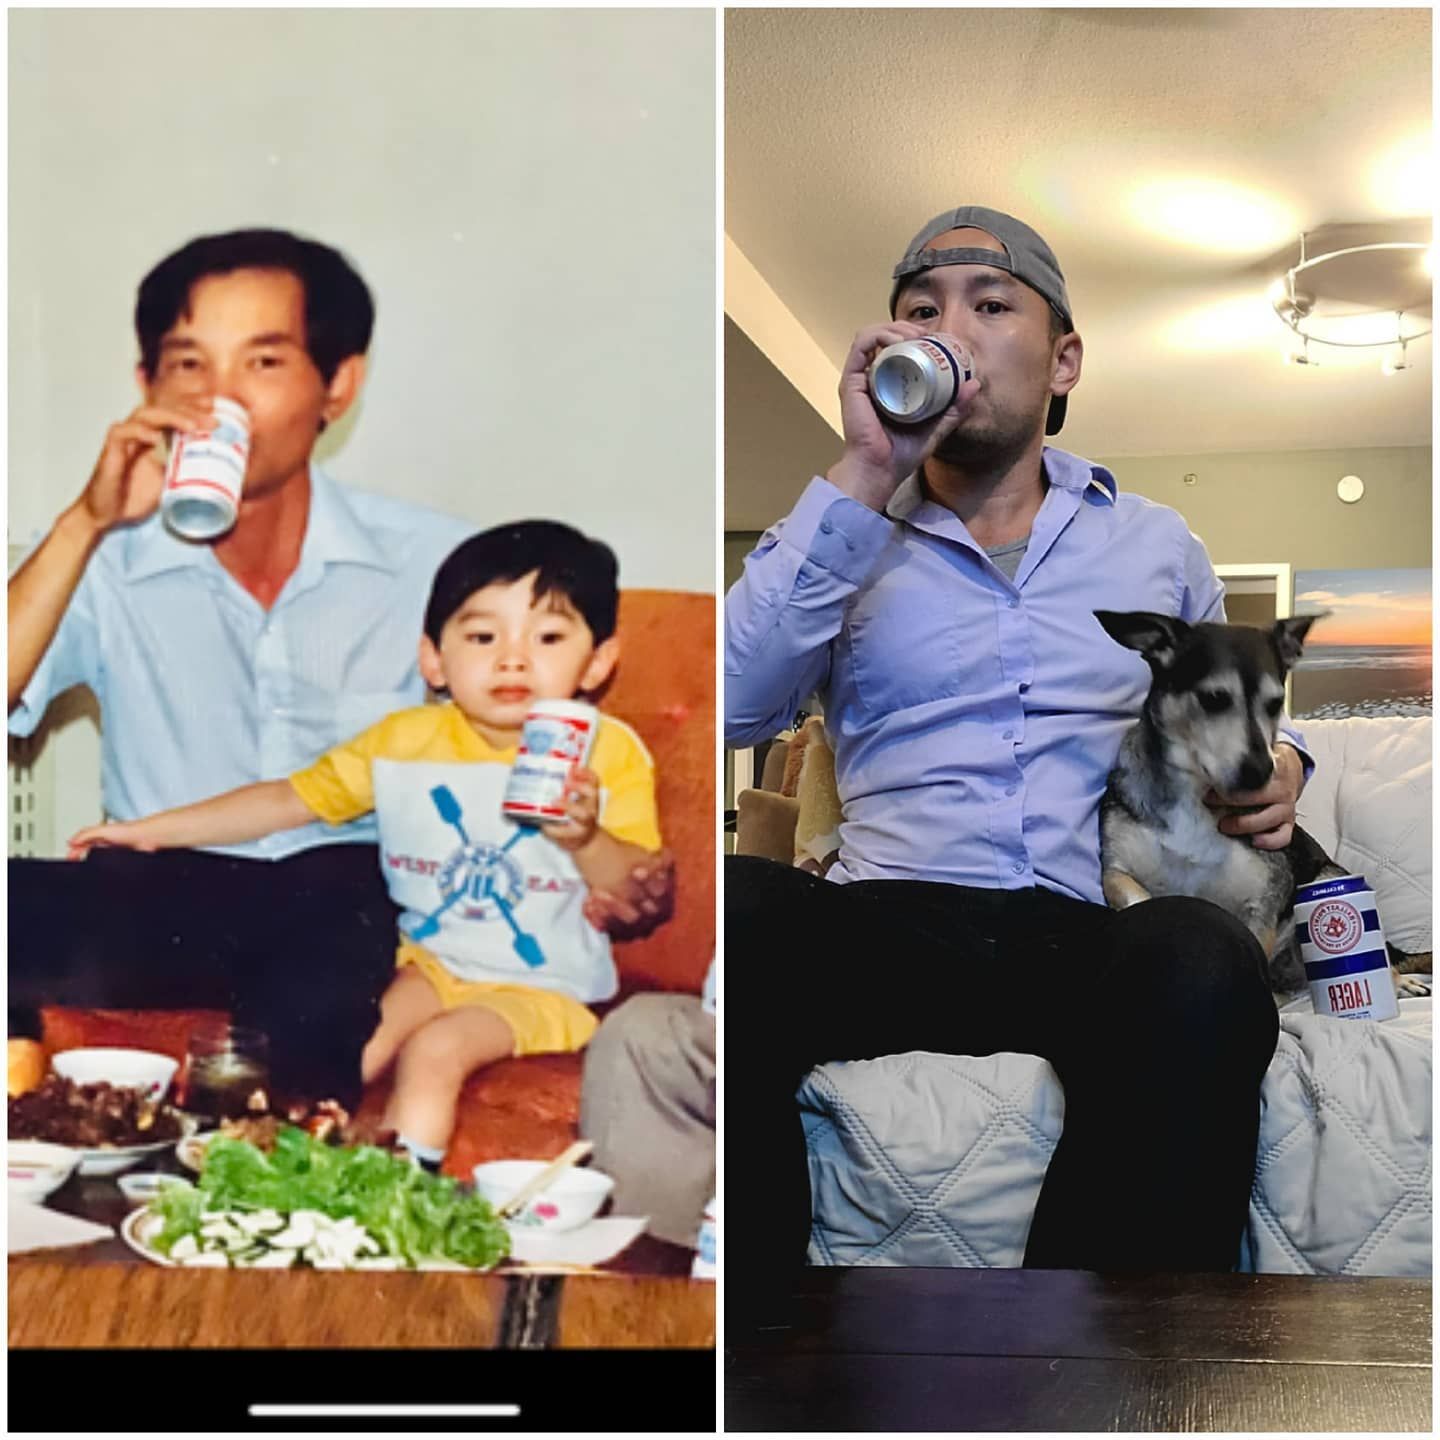 Recreating a shot of me and my dad 30 years later